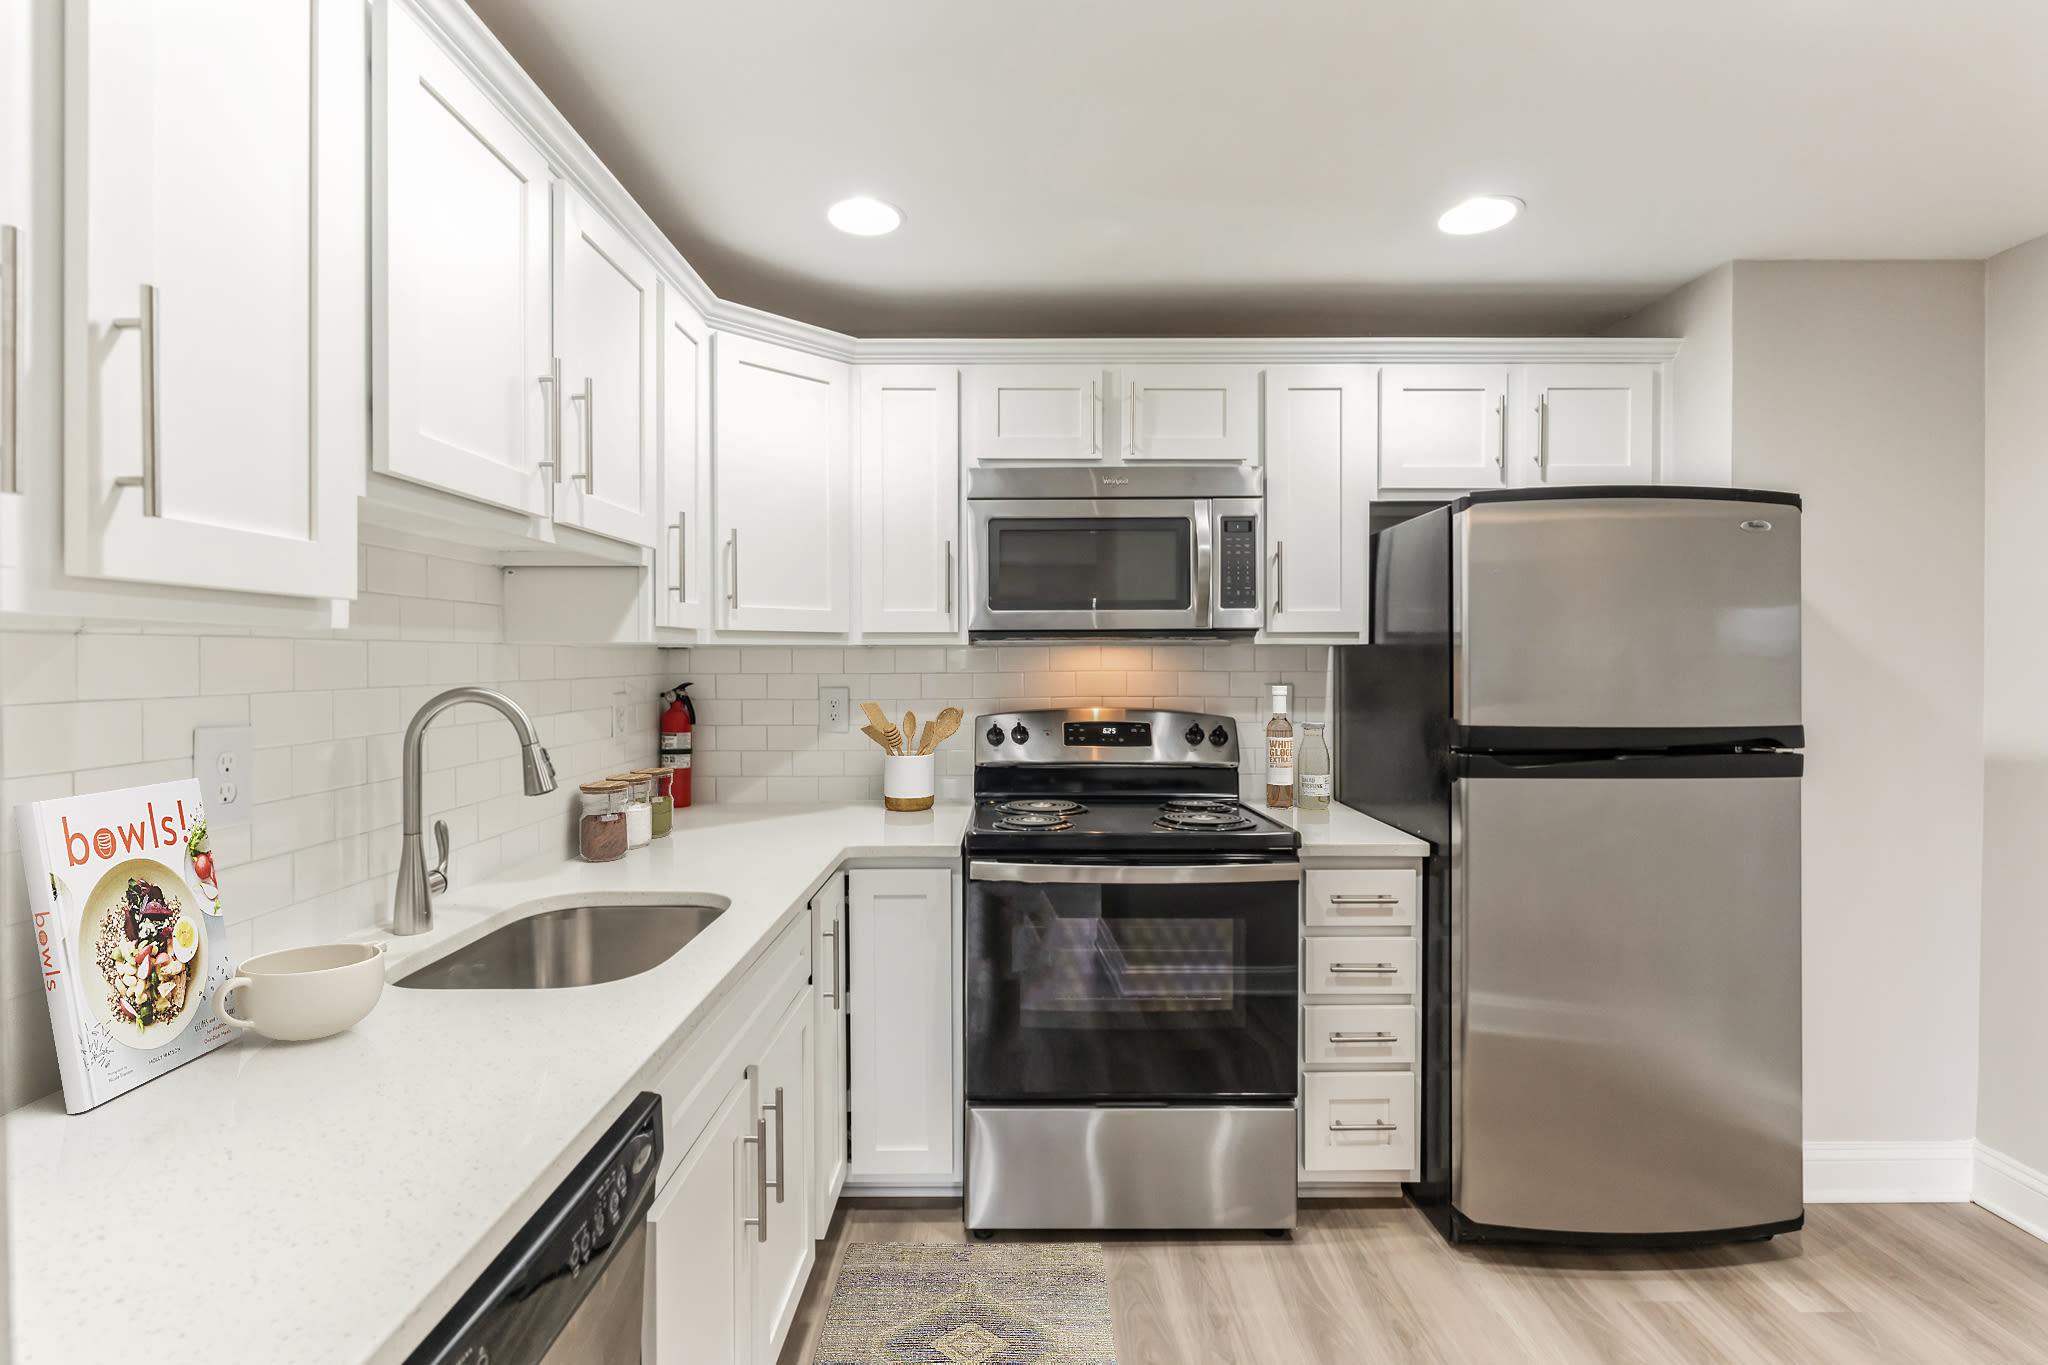 Spacious Apartments with a Refrigerator and energy efficient appliances at Eagle Rock Apartments at Malvern